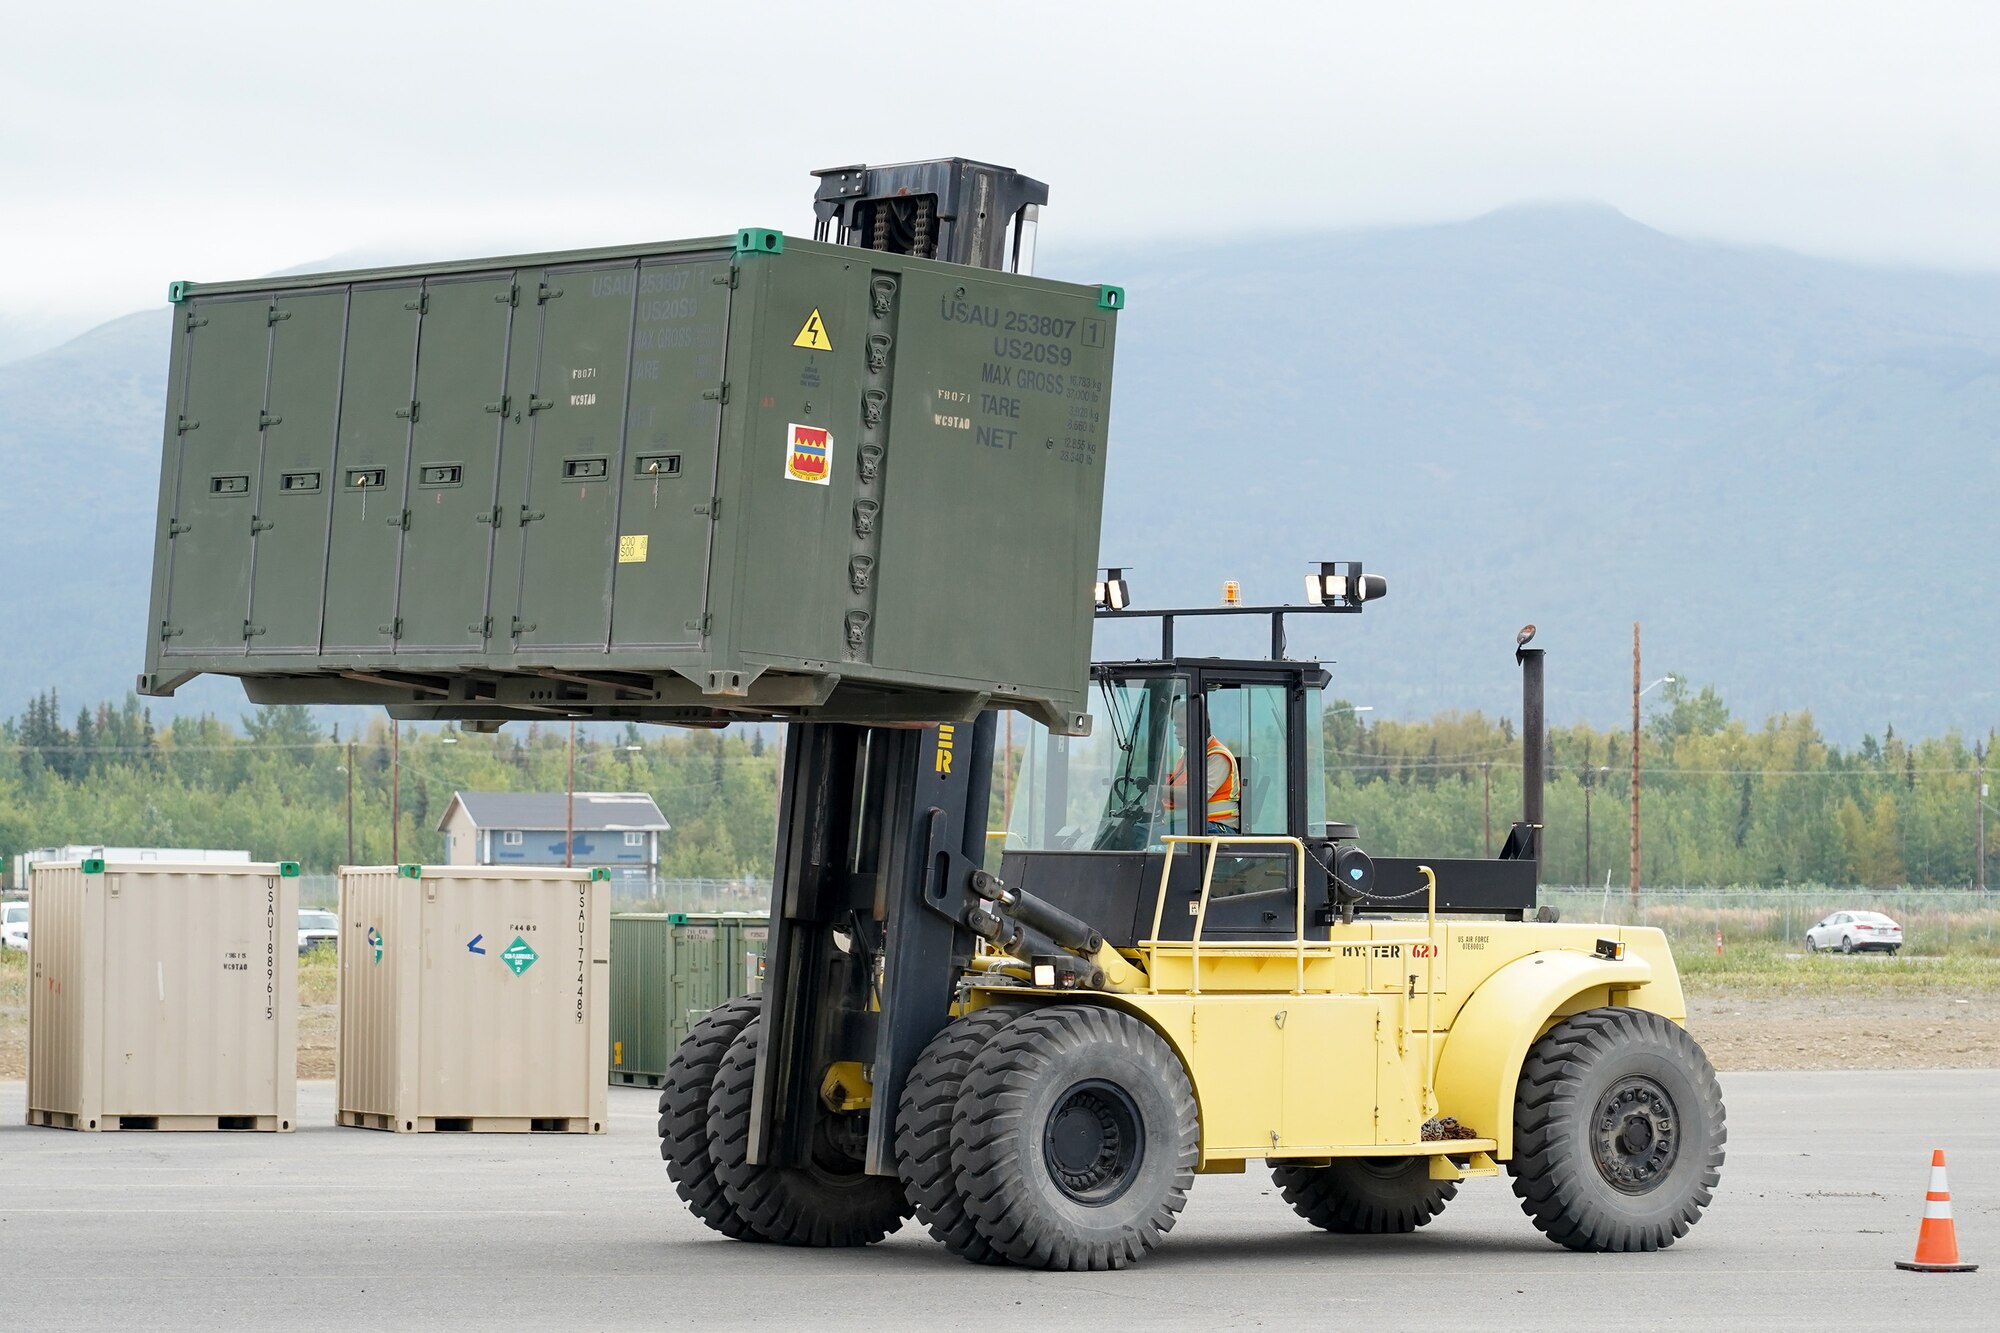 An Air Force civilian Airman assigned to the 773d Logistics Readiness Squadron moves equipment of the 4th Infantry Brigade Combat Team (Airborne), 25th Infantry Division, U.S. Army Alaska, while preparing vehicles and equipment for transportation operations on Joint Base Elmendorf-Richardson, Alaska, Aug. 14, 2019, as part of a joint readiness exercise. This exercise allows the Army, Air Force and Navy to move material and personnel using ground, sea and air methods of transportation.